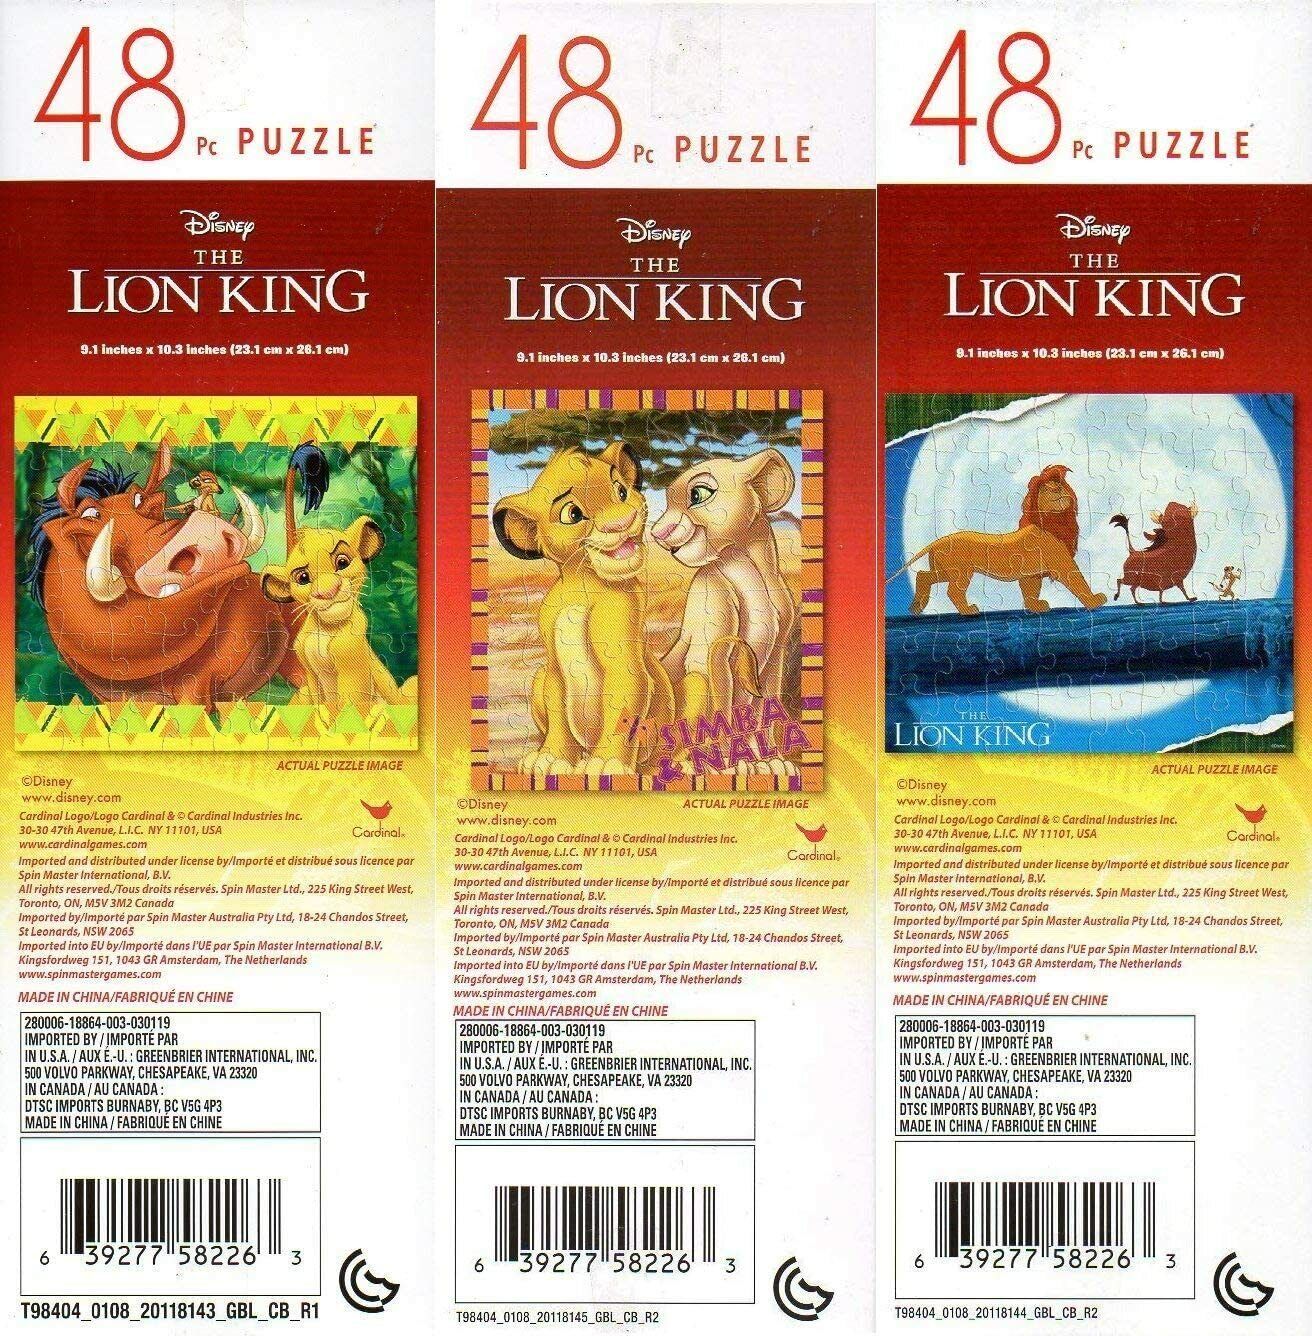 The Lion King - 48 Pieces Jigsaw Puzzle (Set of 3)